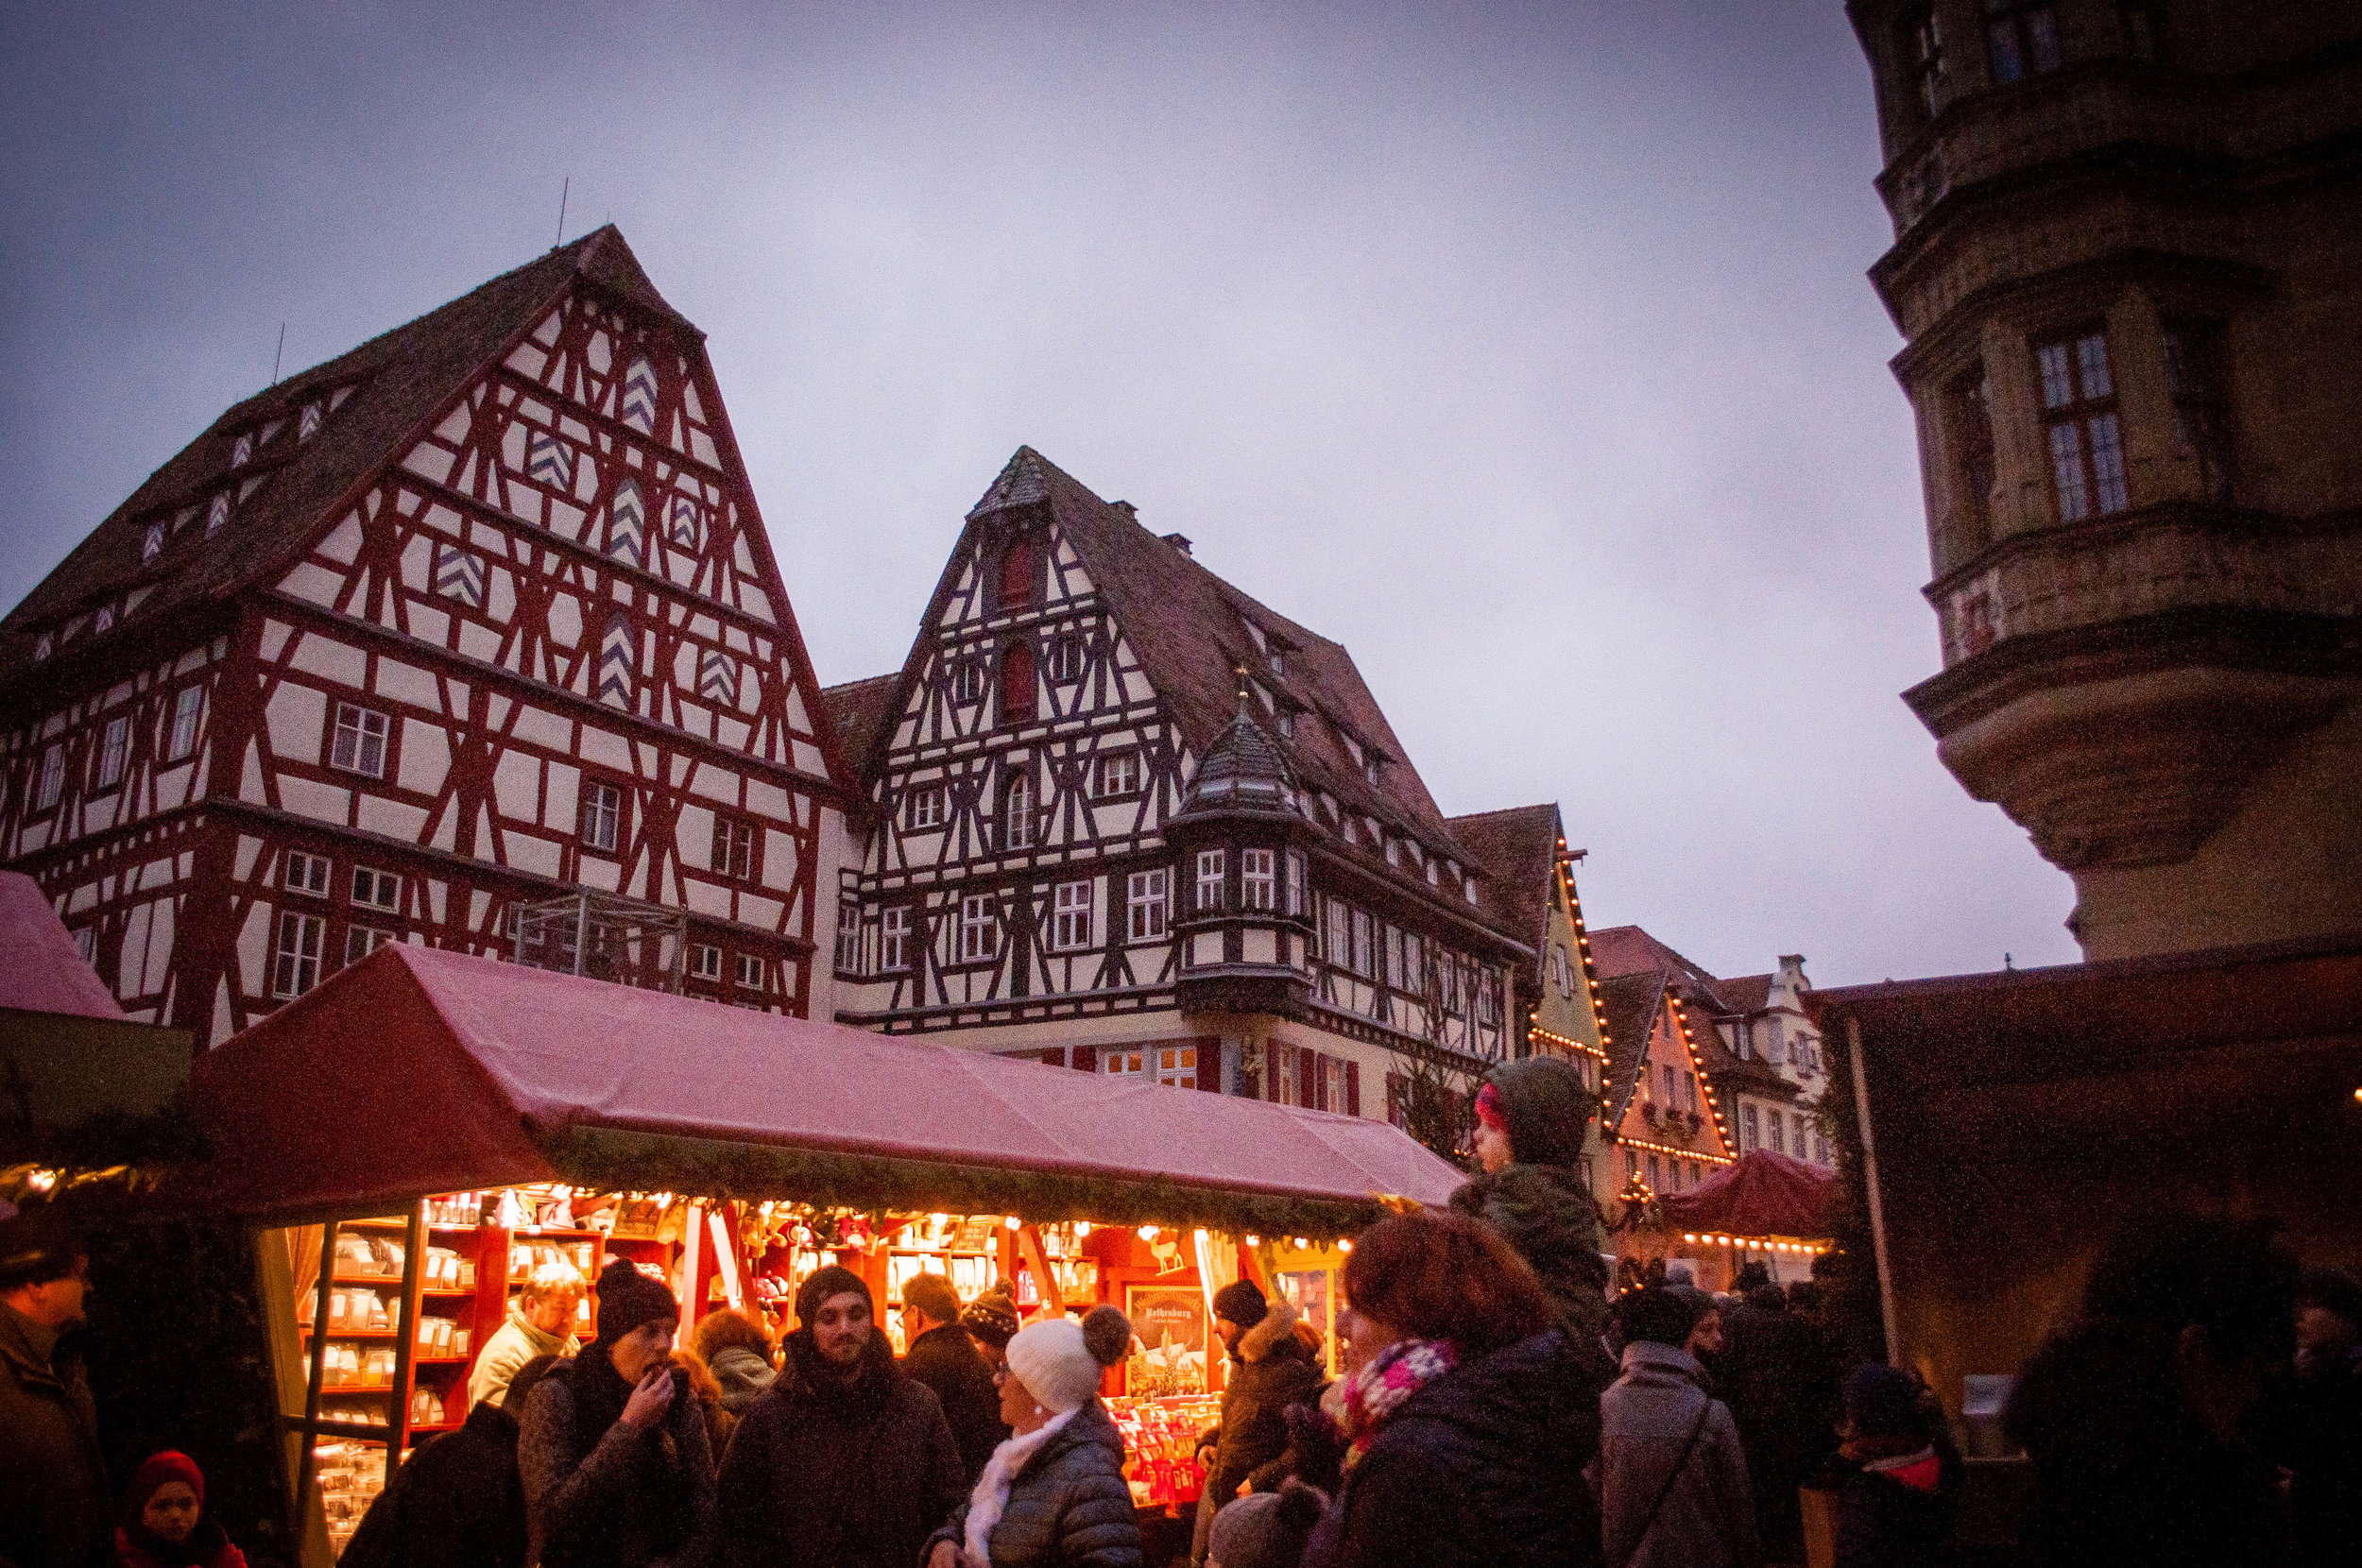 things to do in Rothenburg ob der Tauber. Rothenburg ob der Tauber medieval buildings with the Christmas markets stands 